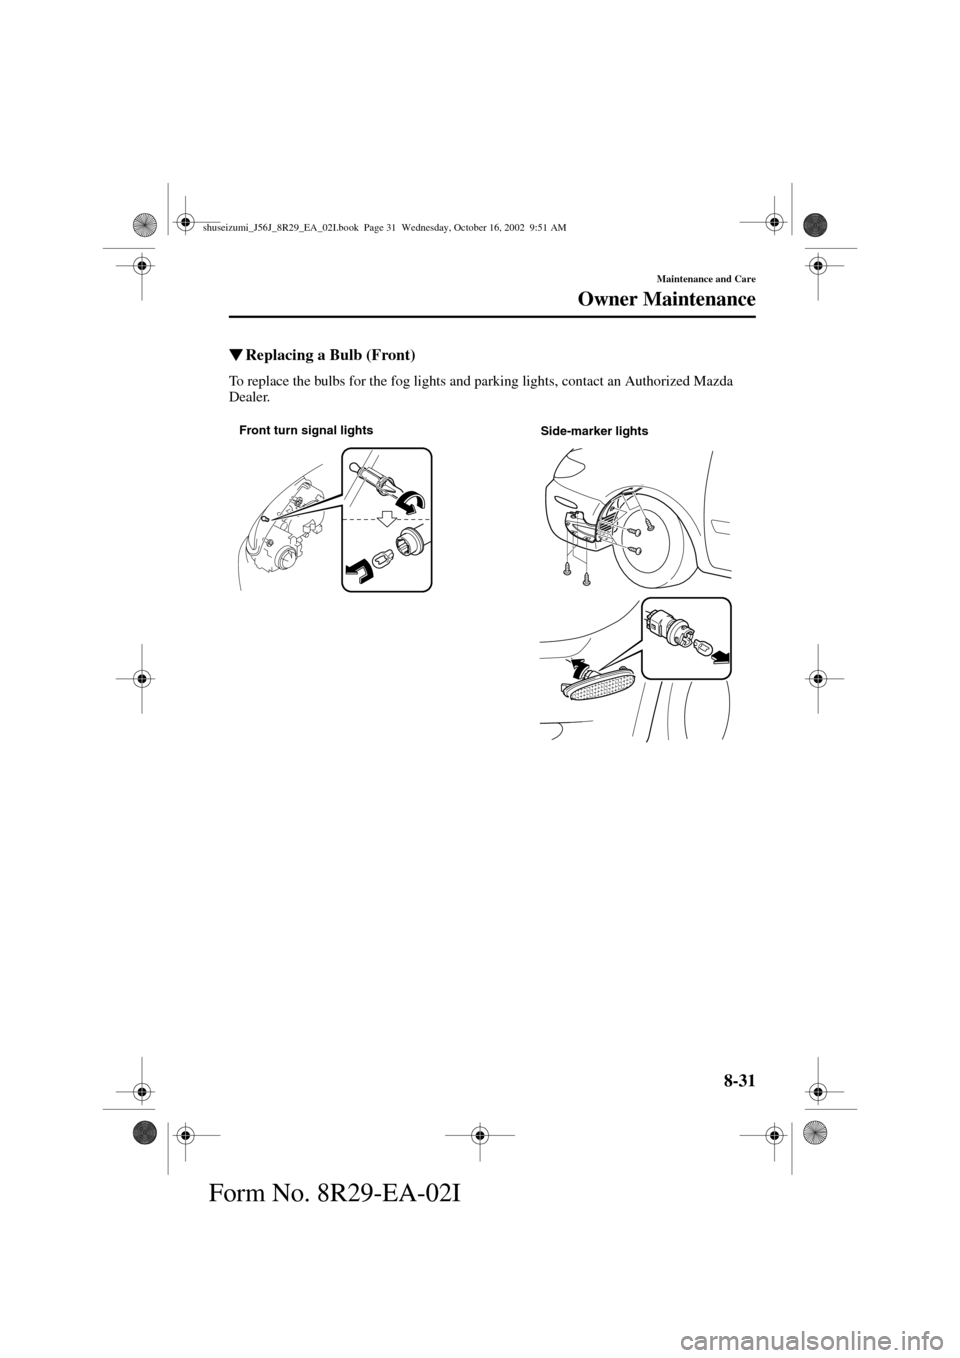 MAZDA MODEL 6 2003  Owners Manual (in English) 8-31
Maintenance and Care
Owner Maintenance
Form No. 8R29-EA-02I
Replacing a Bulb (Front)
To replace the bulbs for the fog lights and parking lights, contact an Authorized Mazda 
Dealer.
Front turn s